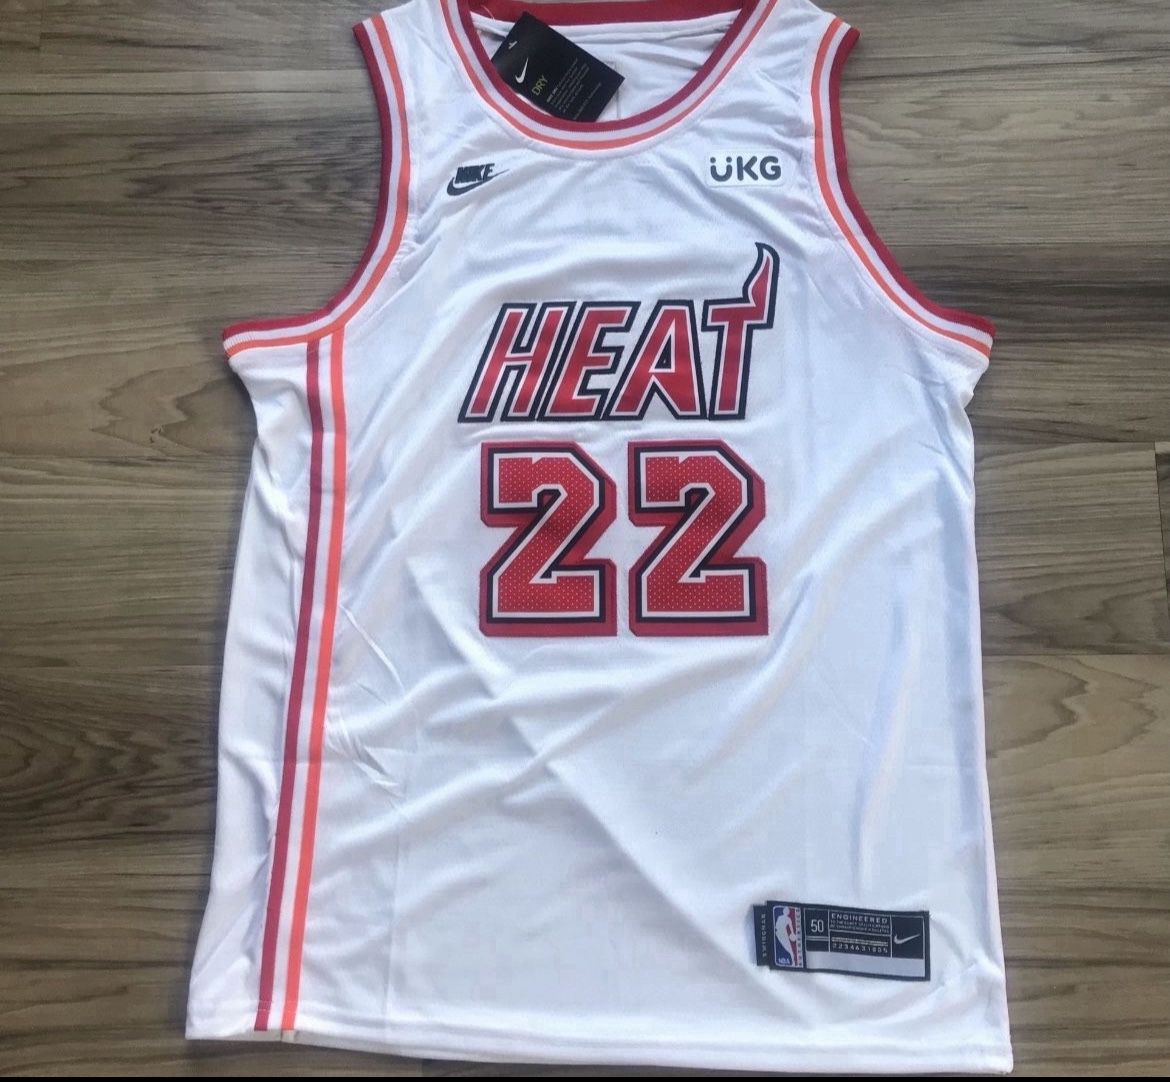 Jimmy Butler Miami Vice Jersey for Sale in Pompano Beach, FL - OfferUp